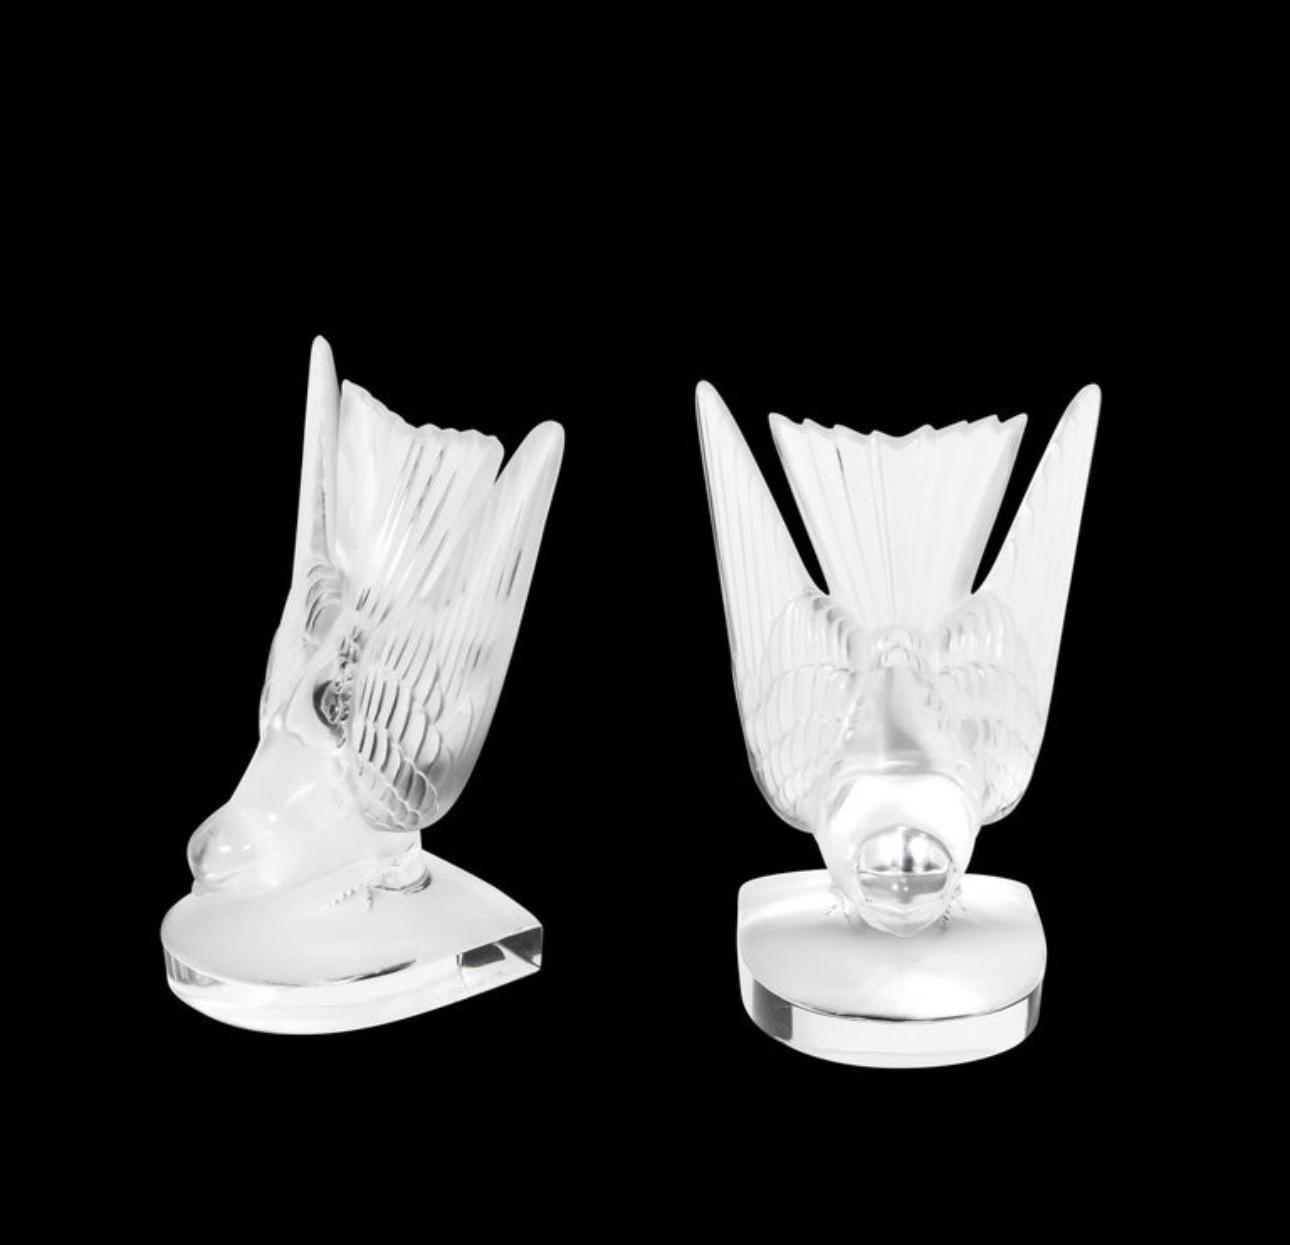 Pair of gorgeous frosted crystal Hirondelle / Swallow bookends by Lalique of France, circa 1980s. The bookends are in very good vintage condition with no chips or cracks and measure 8.5